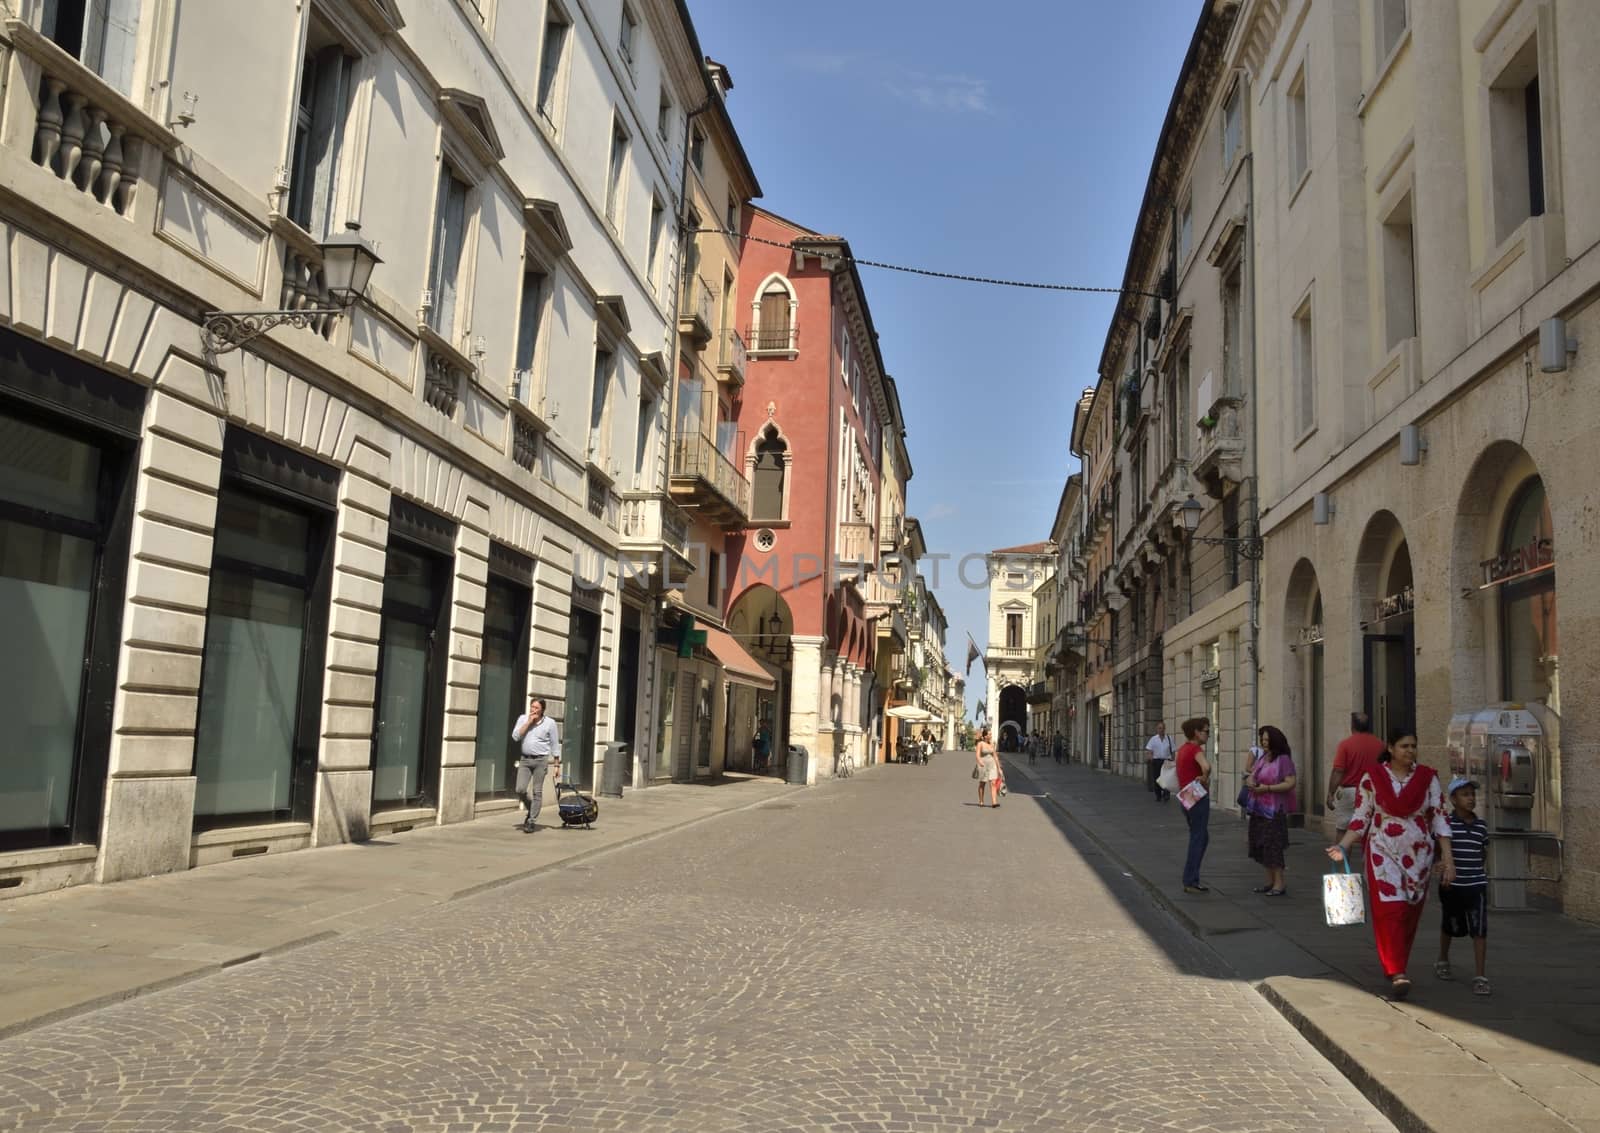 Comercial street in Vicenza, a city in northeastern Italy, in the Veneto region.Vicenza has been enlisted as UNESCO World Heritage Site since 1994.